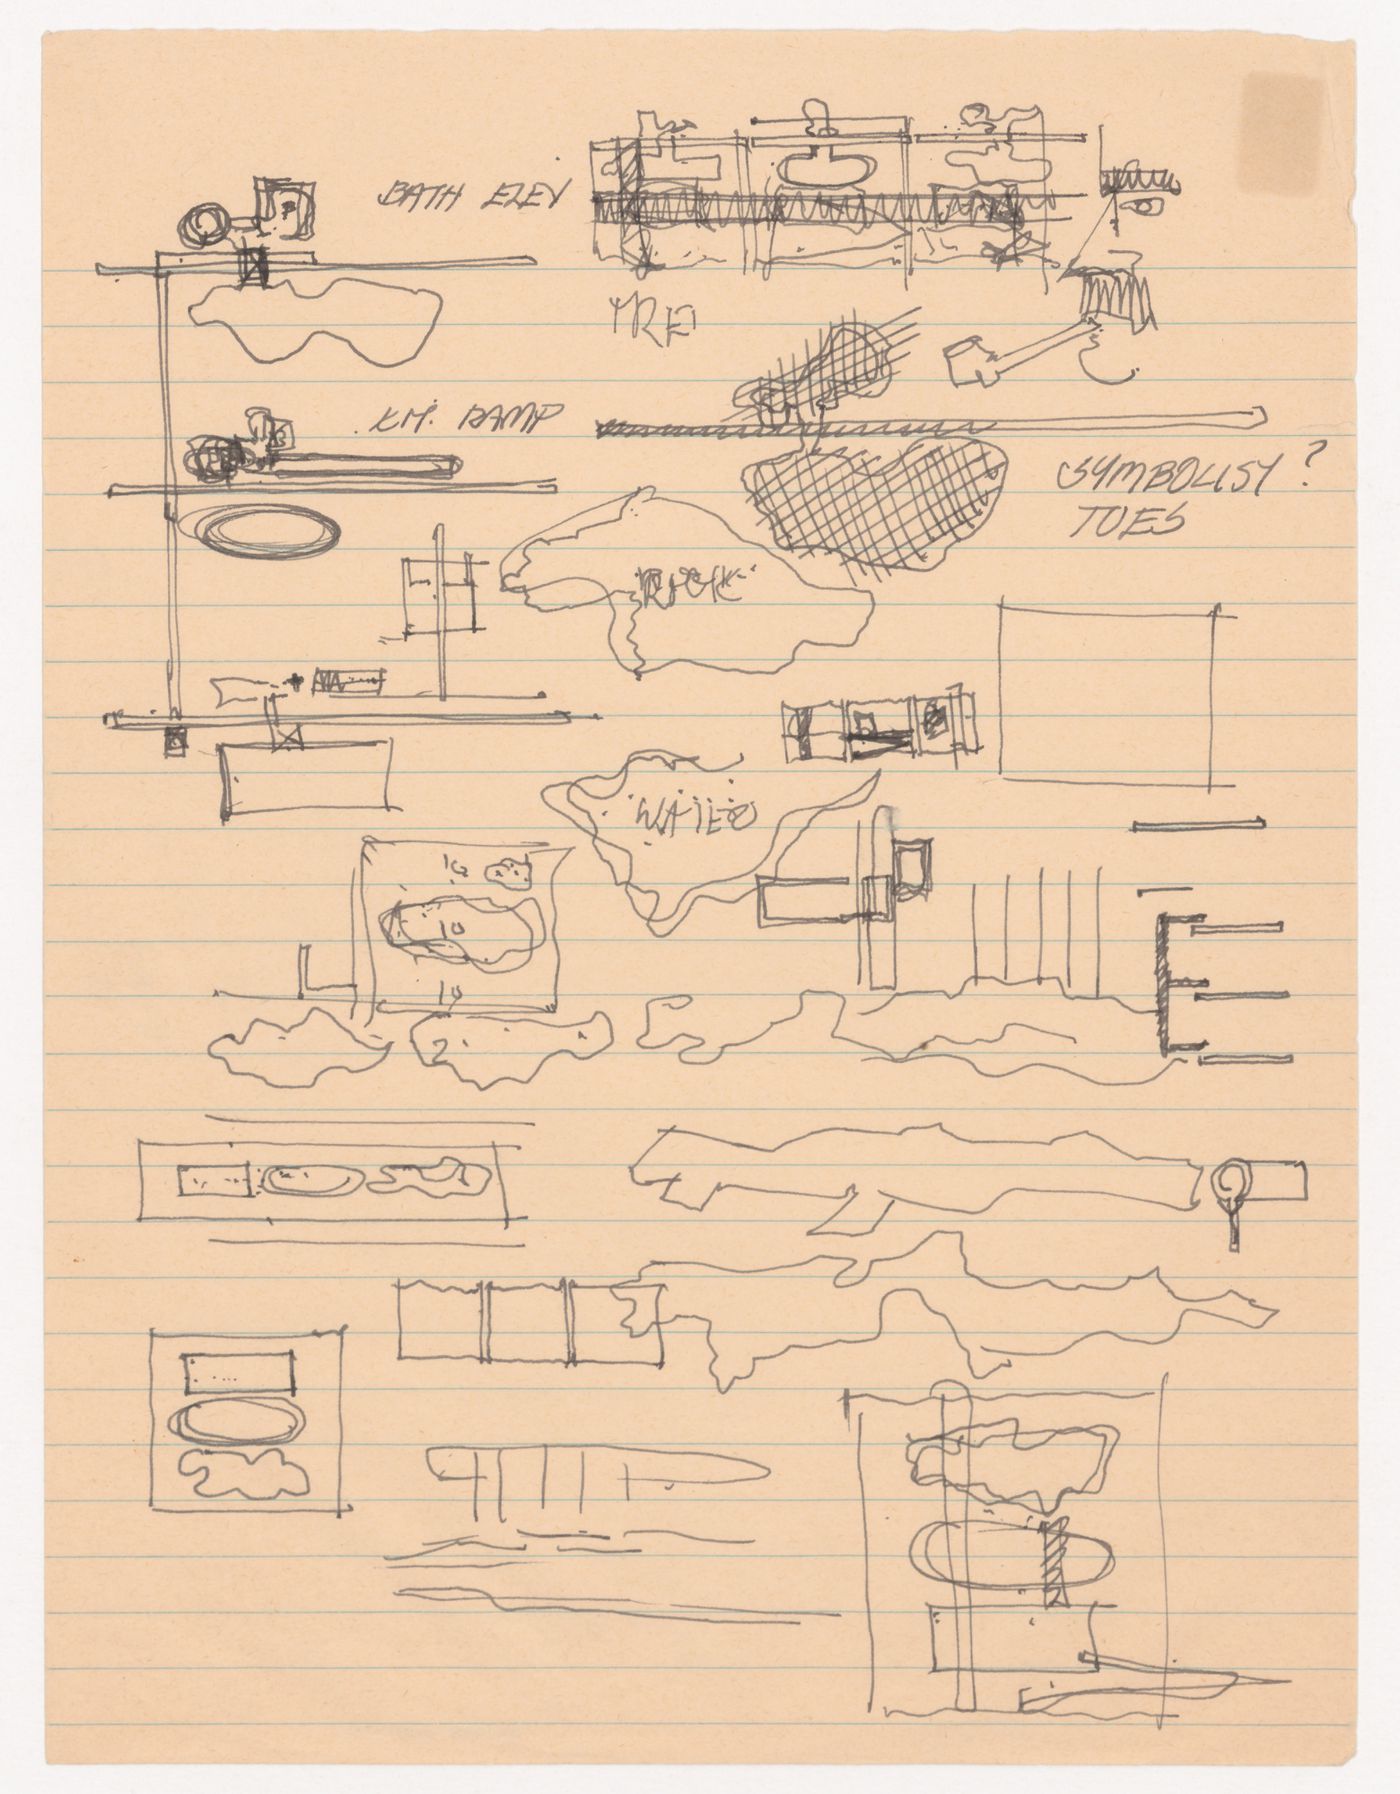 Sketches with annotations for Wall House